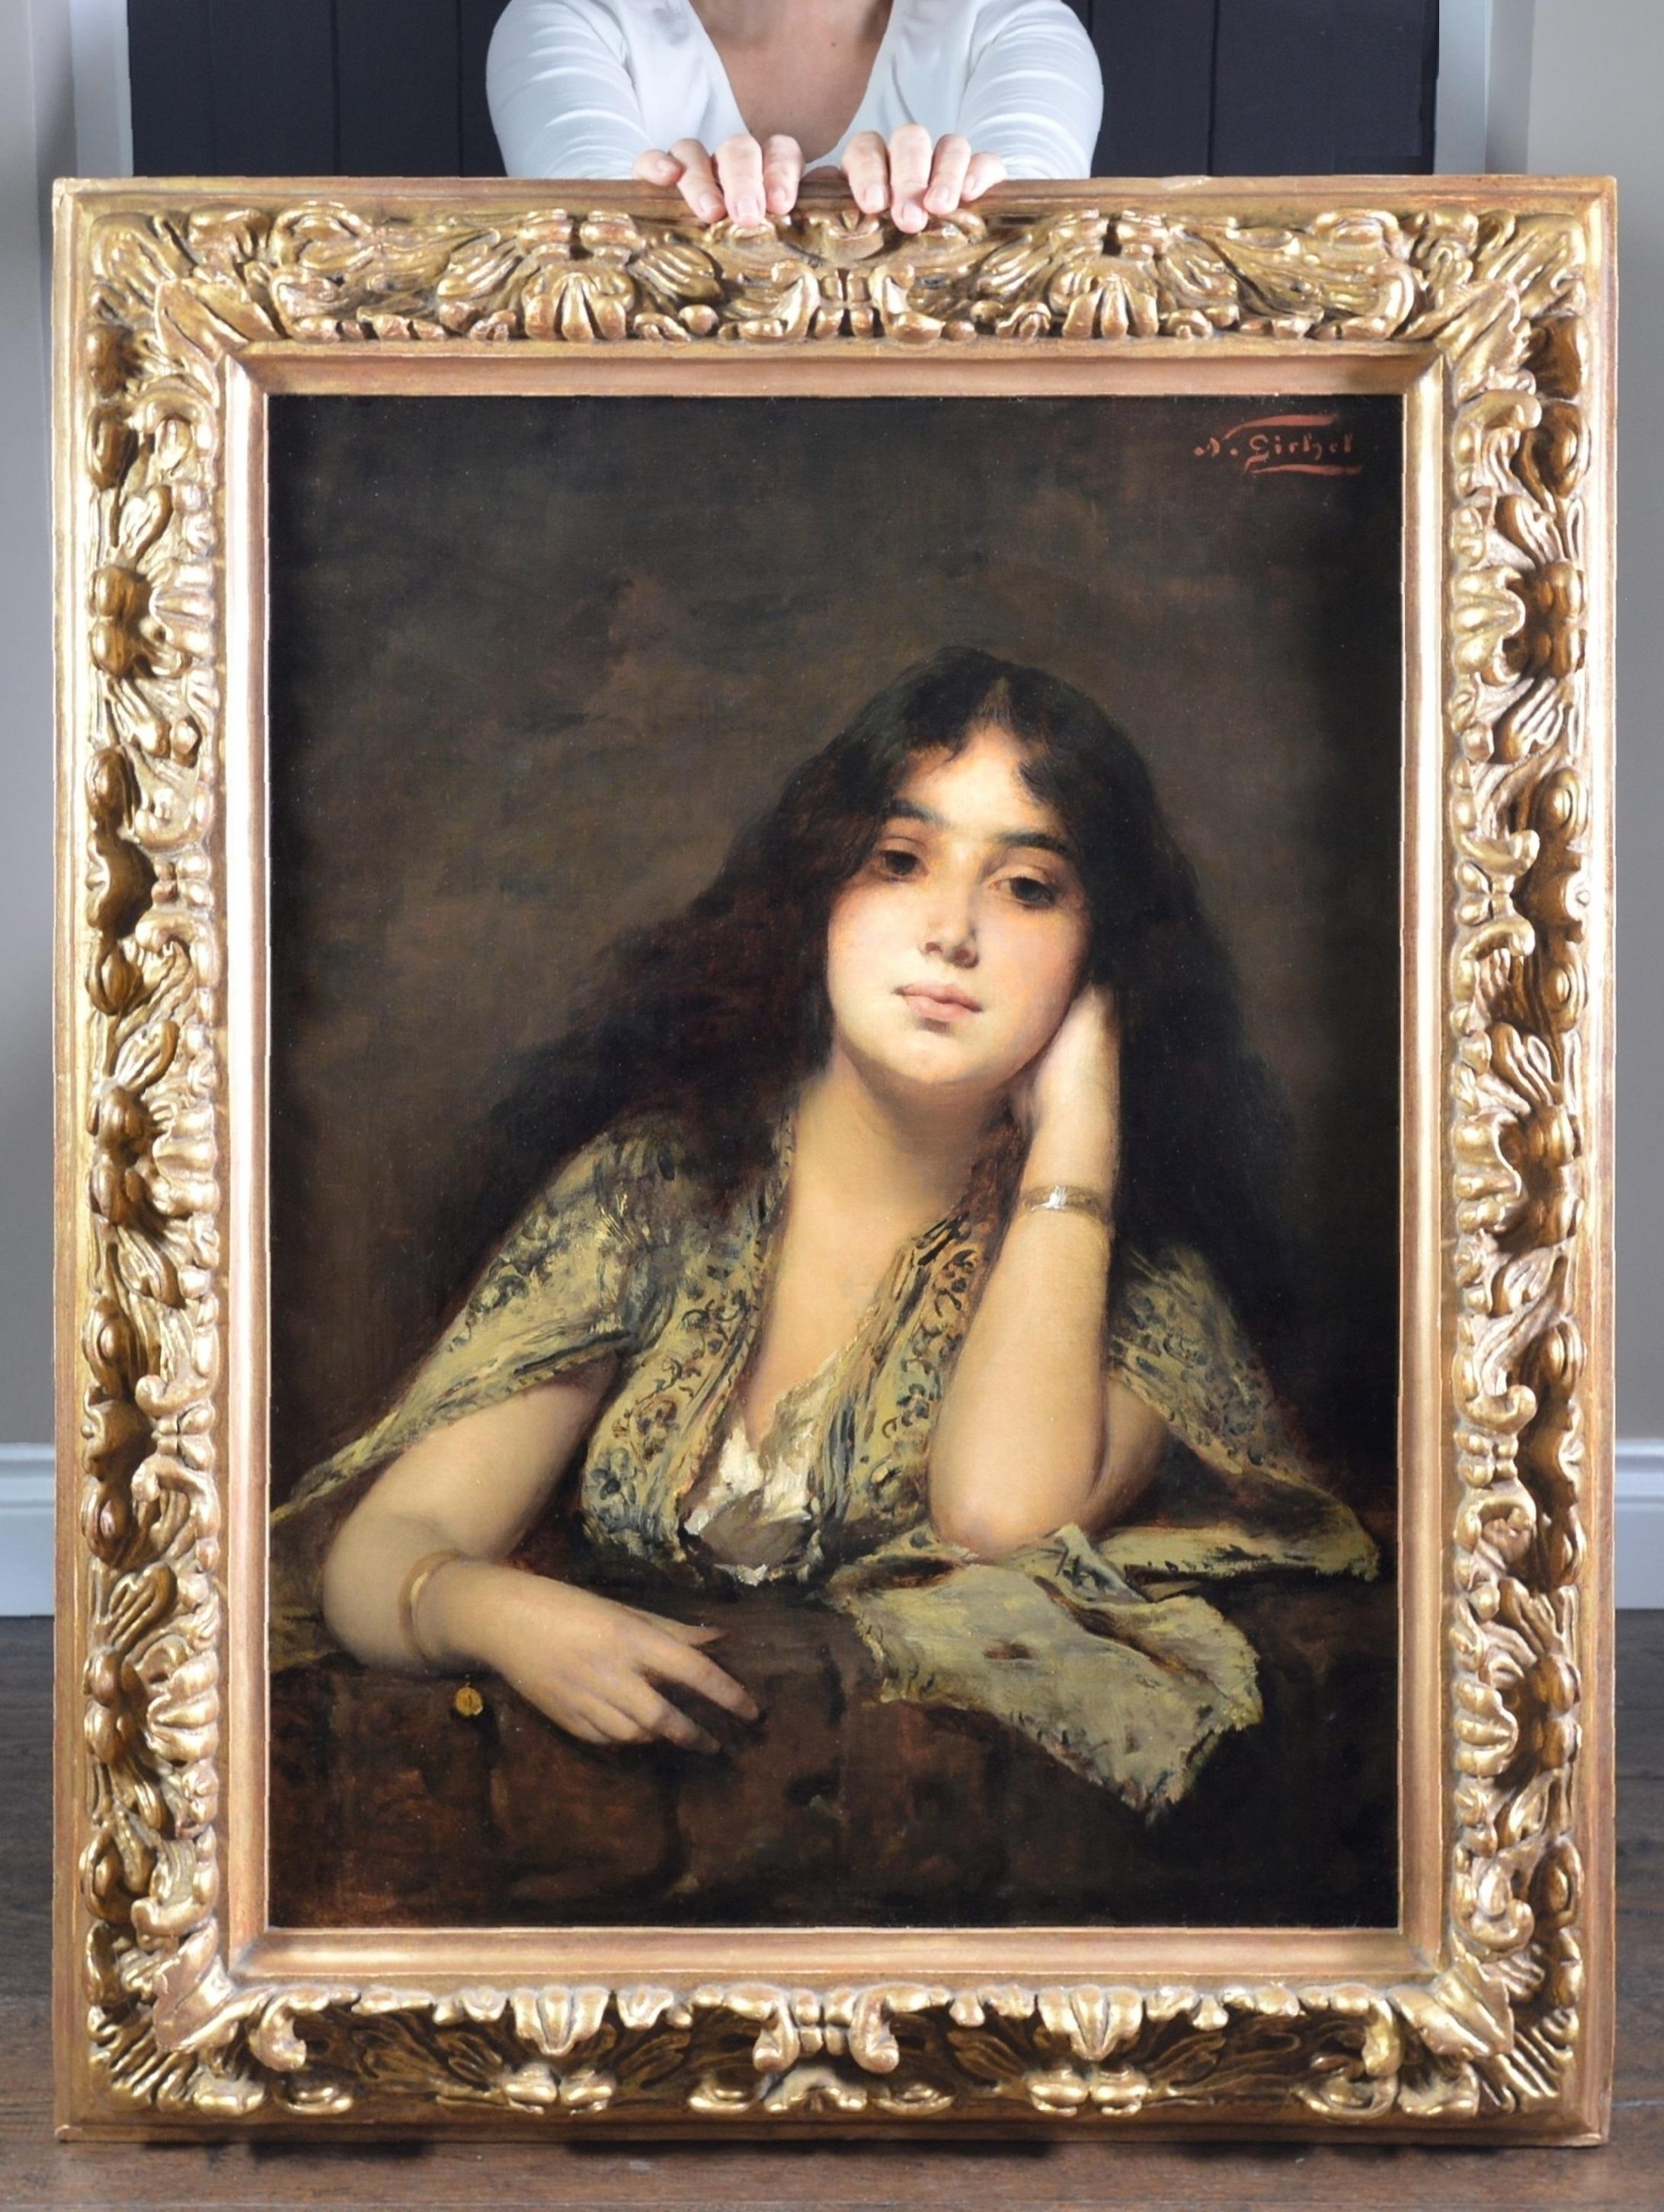 Nathaniel Sichel Figurative Painting - Montenegrin Girl - 19th Century Portrait Oil Painting of Orientalist Beauty